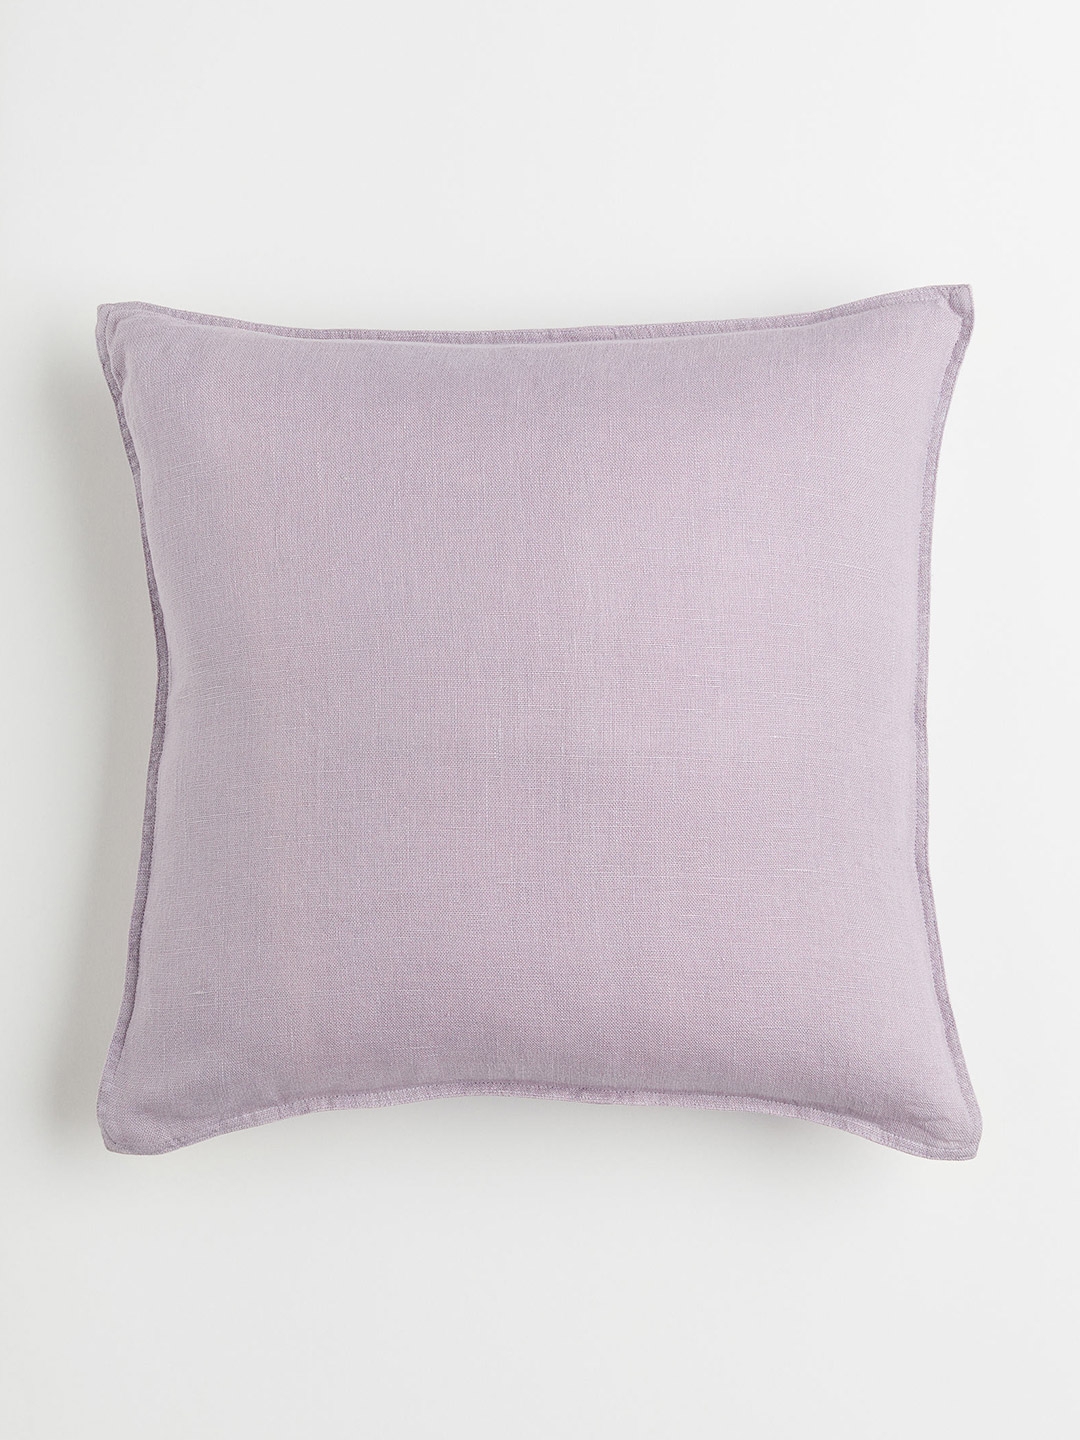 H&M Purple Washed Linen Cushion Cover